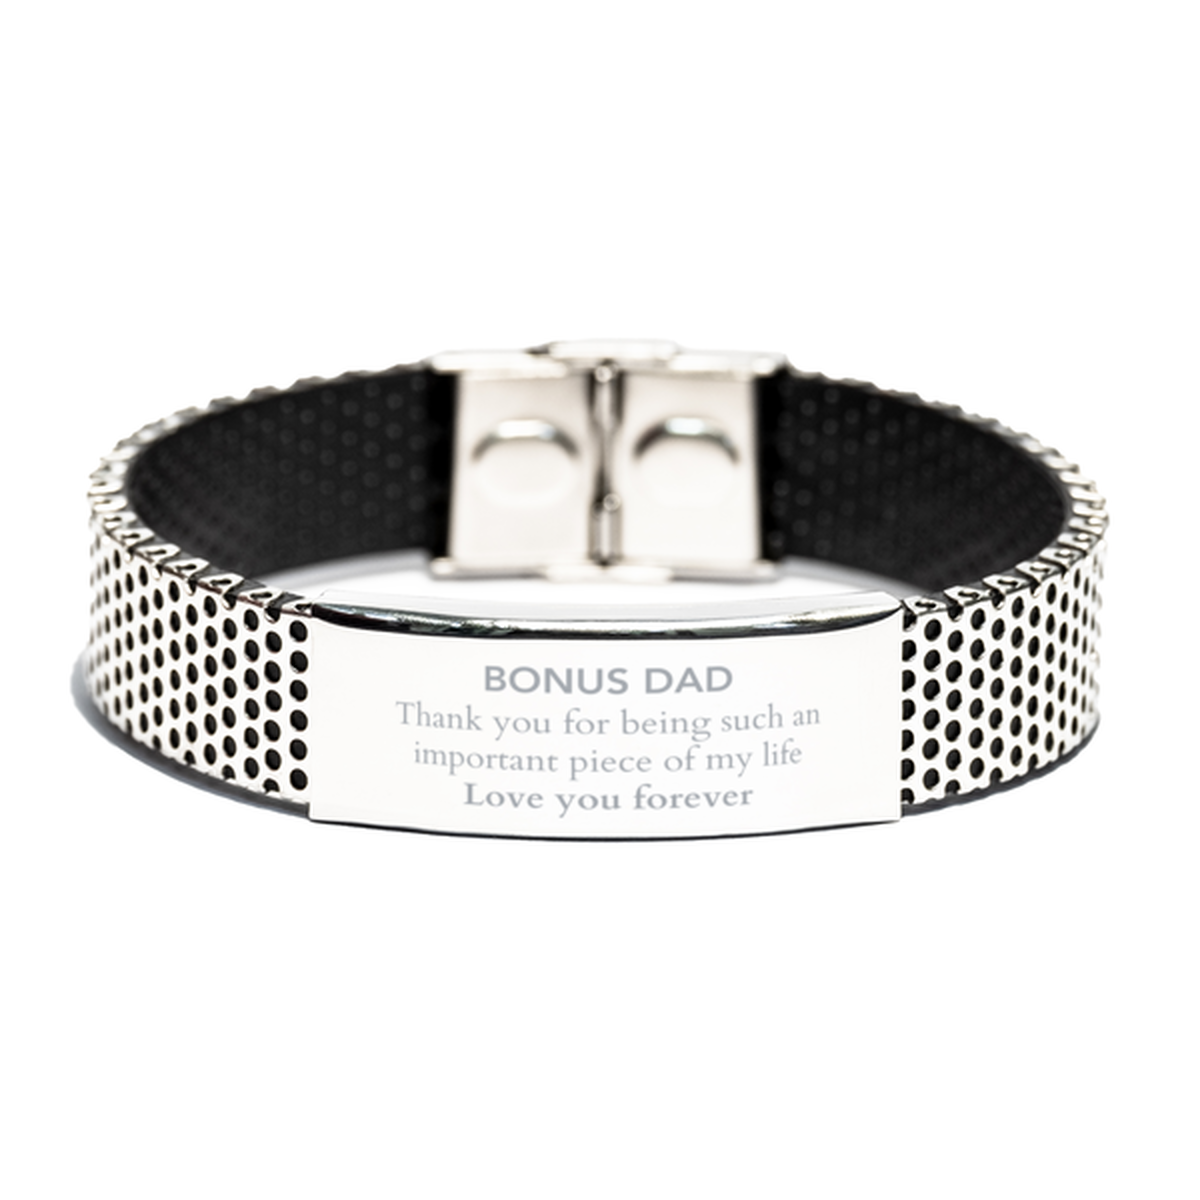 Appropriate Bonus Dad Stainless Steel Bracelet Epic Birthday Gifts for Bonus Dad Thank you for being such an important piece of my life Bonus Dad Christmas Mothers Fathers Day